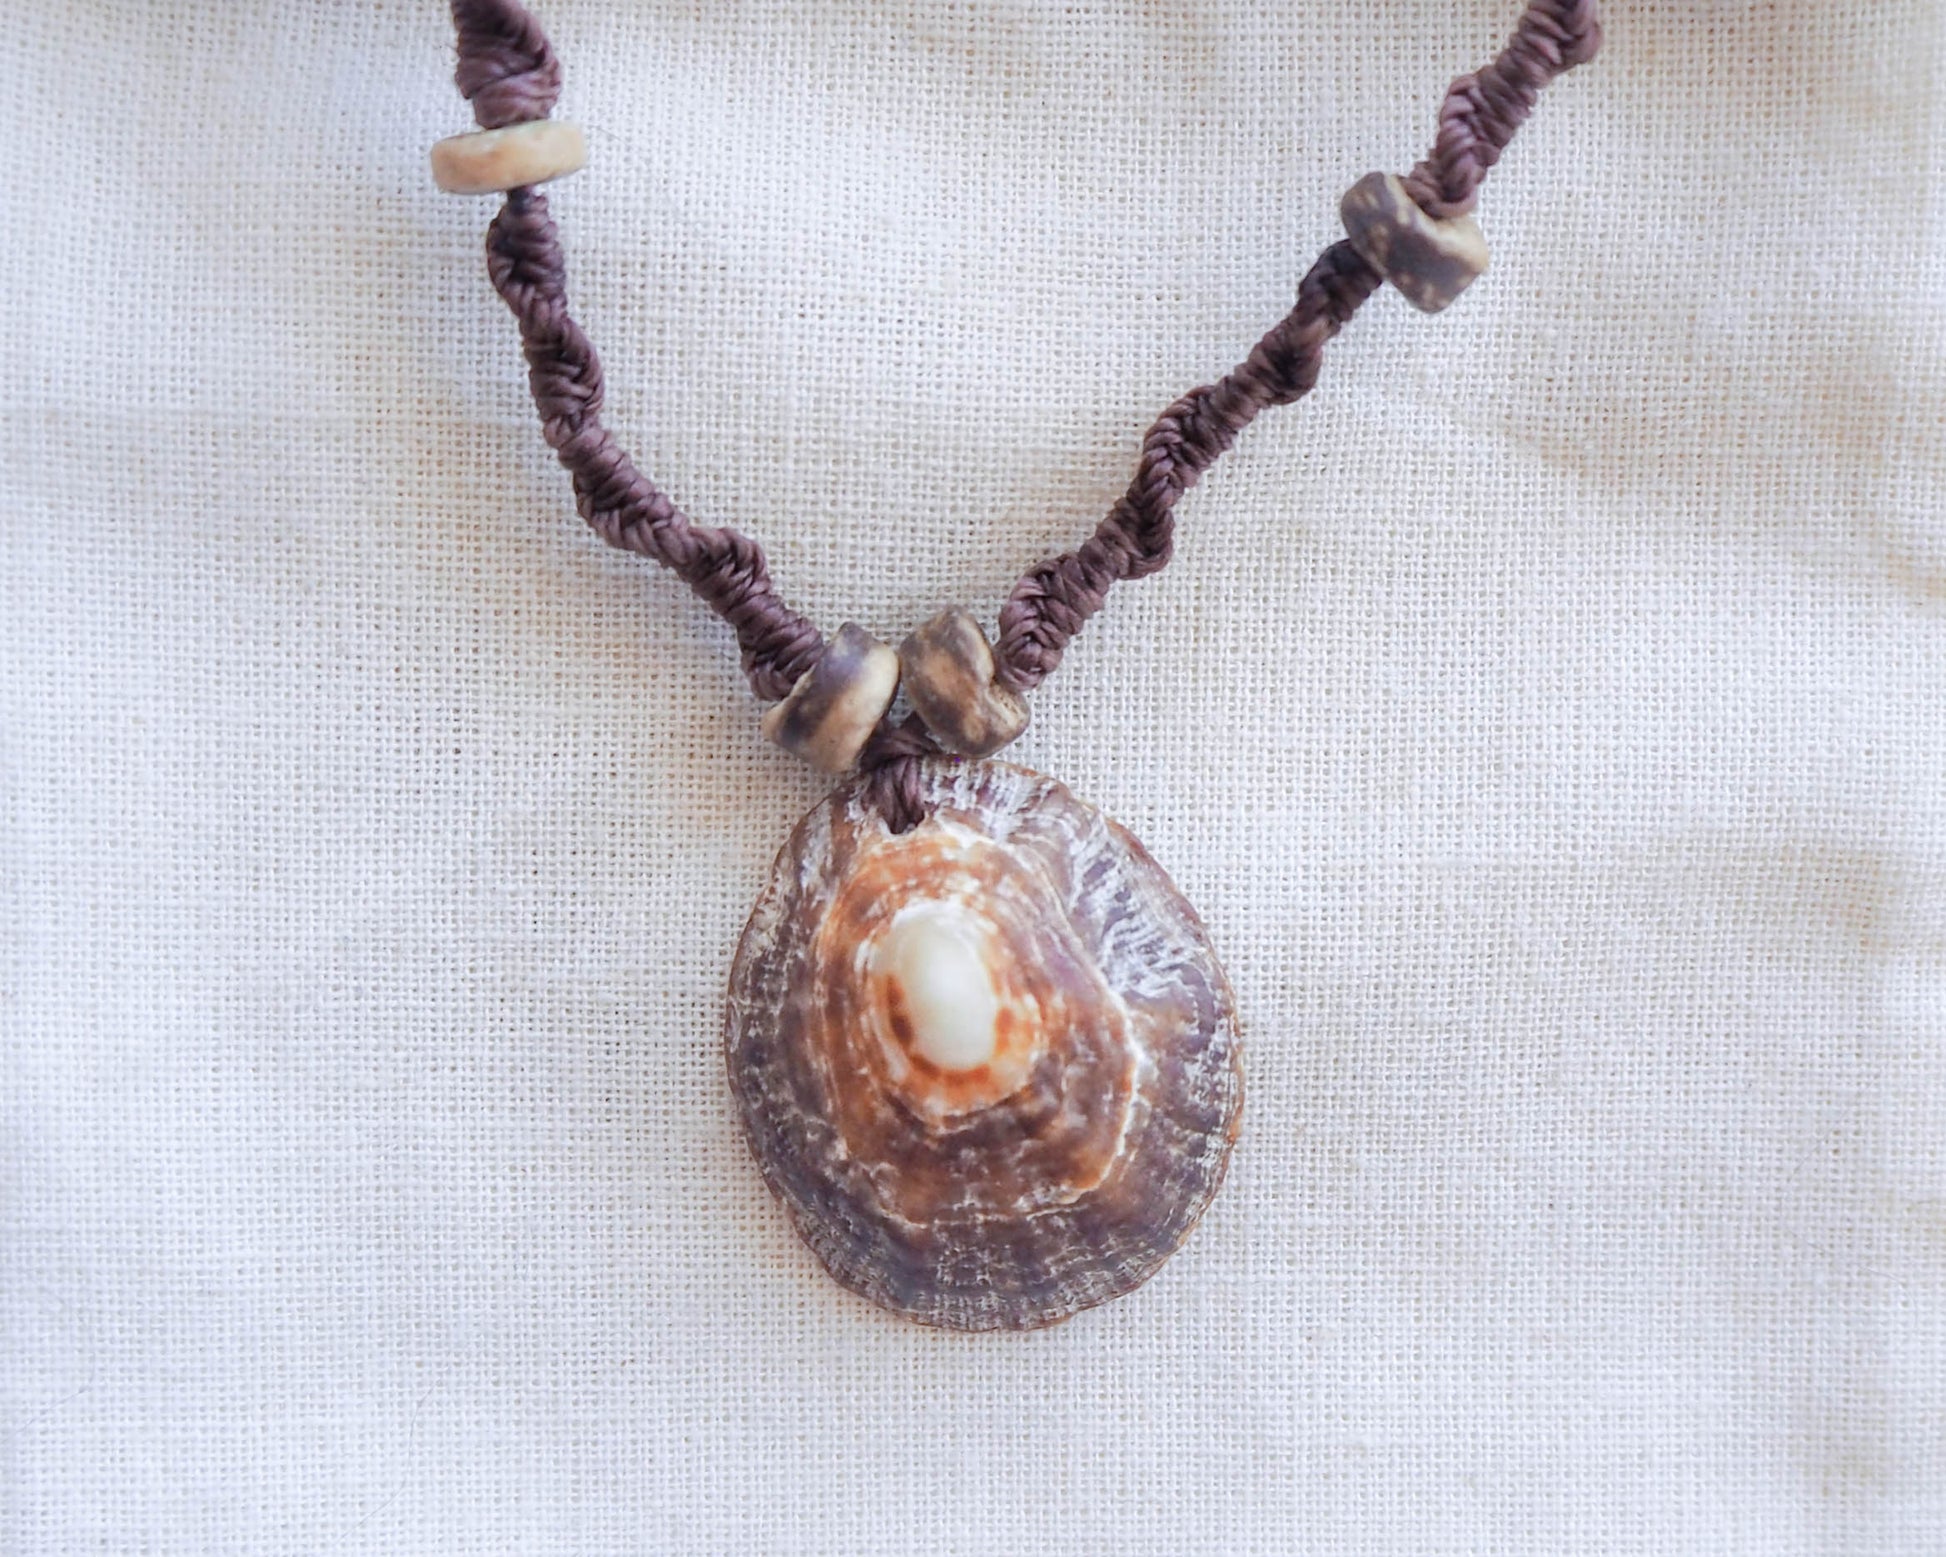 A detailed capture of the intricate braided pattern of the brown wax cord, showcasing the meticulous craftsmanship that went into creating this unique necklace. Wooden beads are skillfully woven into the braid, offering an alluring texture.